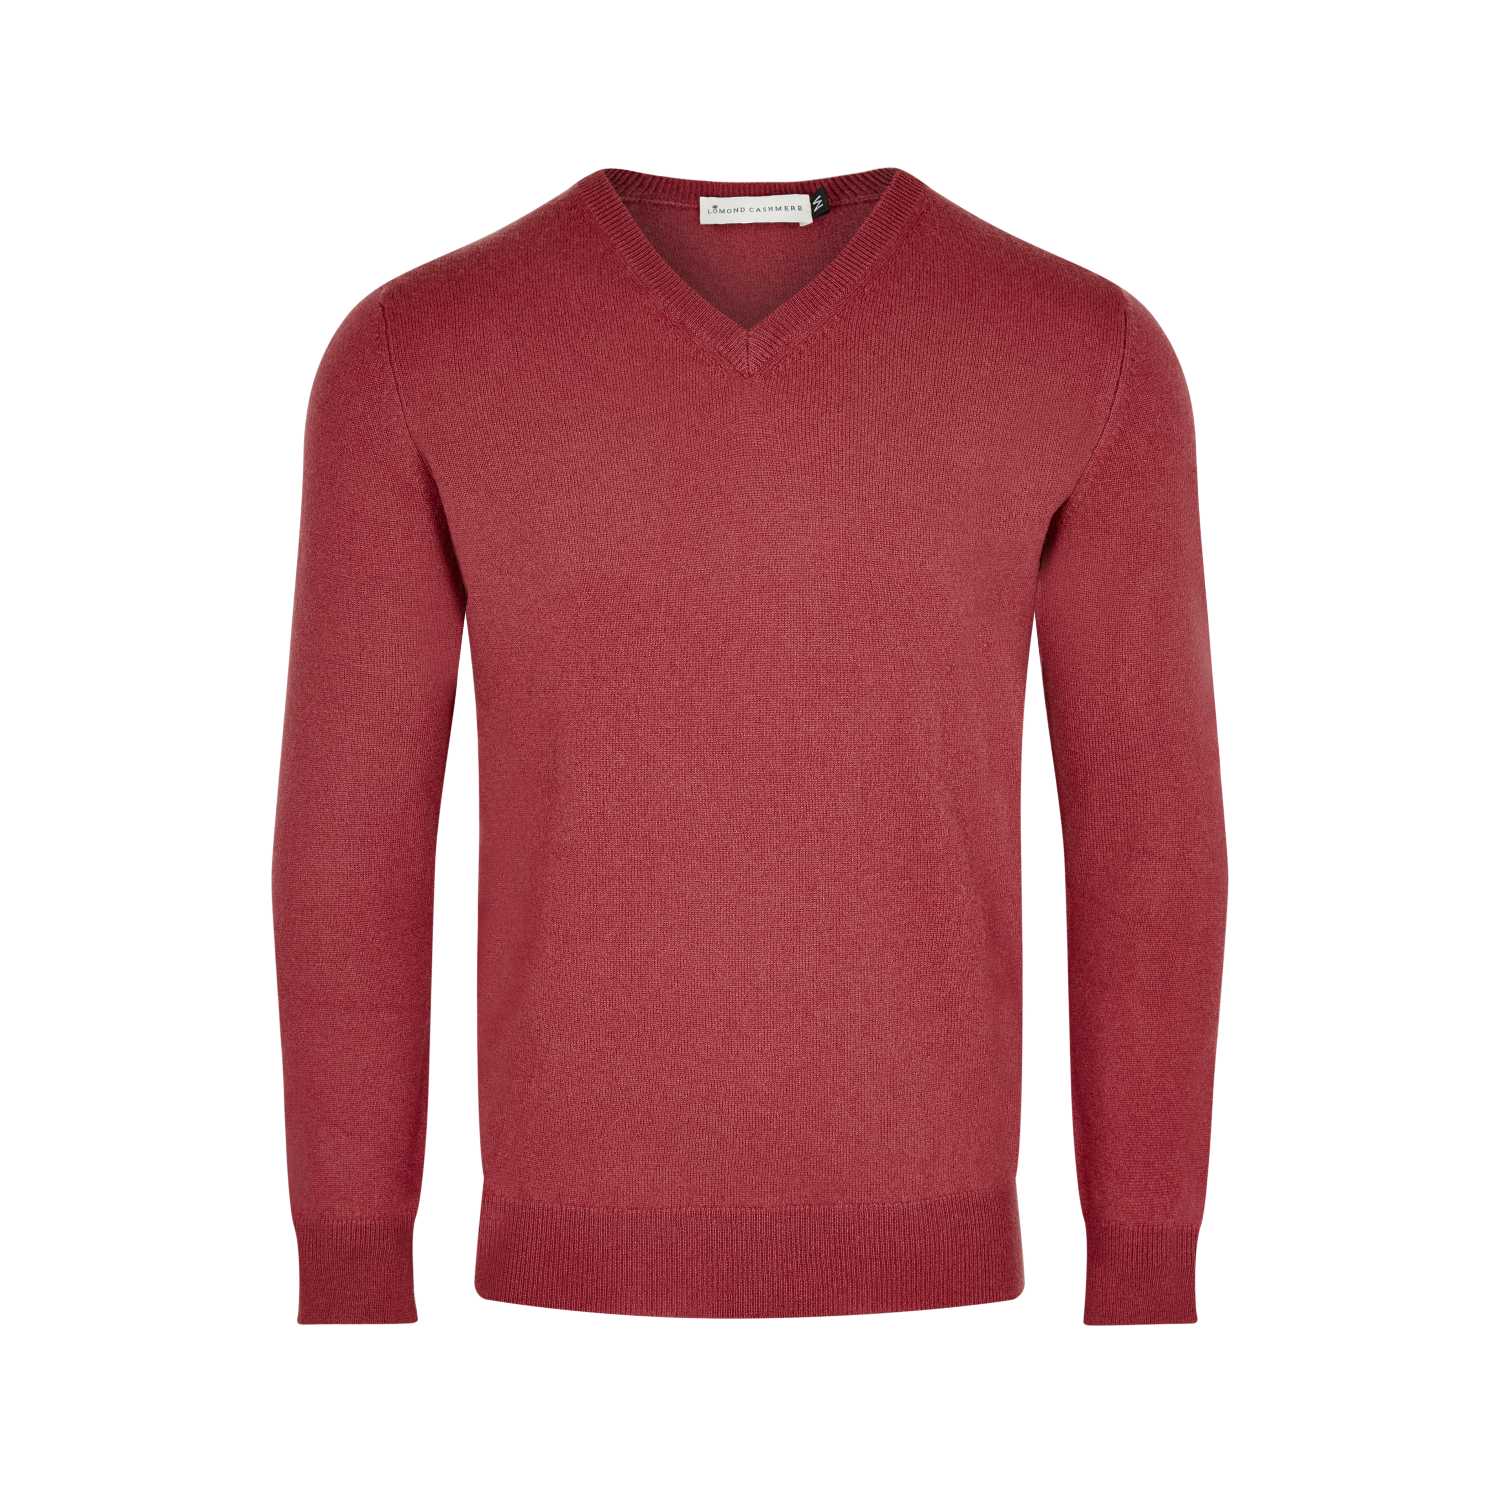 Mens Cashmere Sweaters - The Cashmere Choice